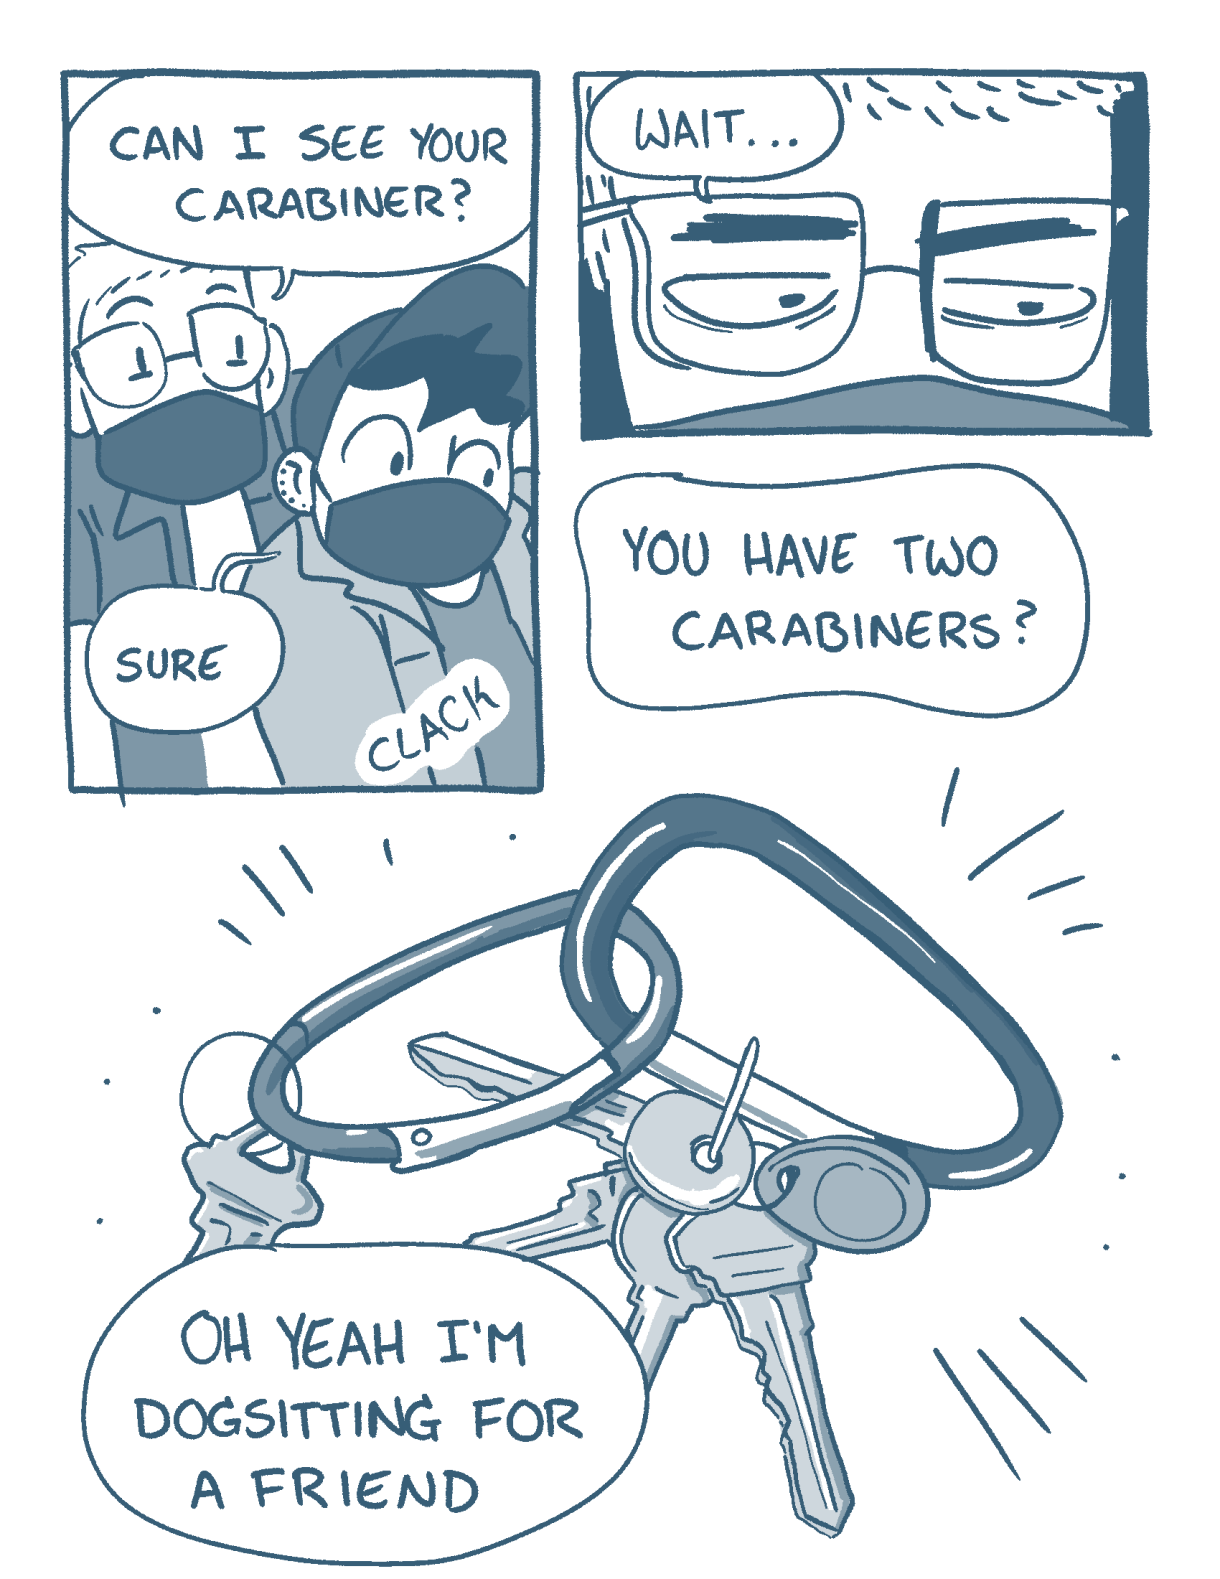 In a three panel comic, two queer friends have on N95 masks. One friend asks the other, "Can I see your carabiner?" and the other friend says "Sure!" And there's a clacking of two carabiners together. The friend admits, "Oh yeah, I'm dog sitting for a friend"